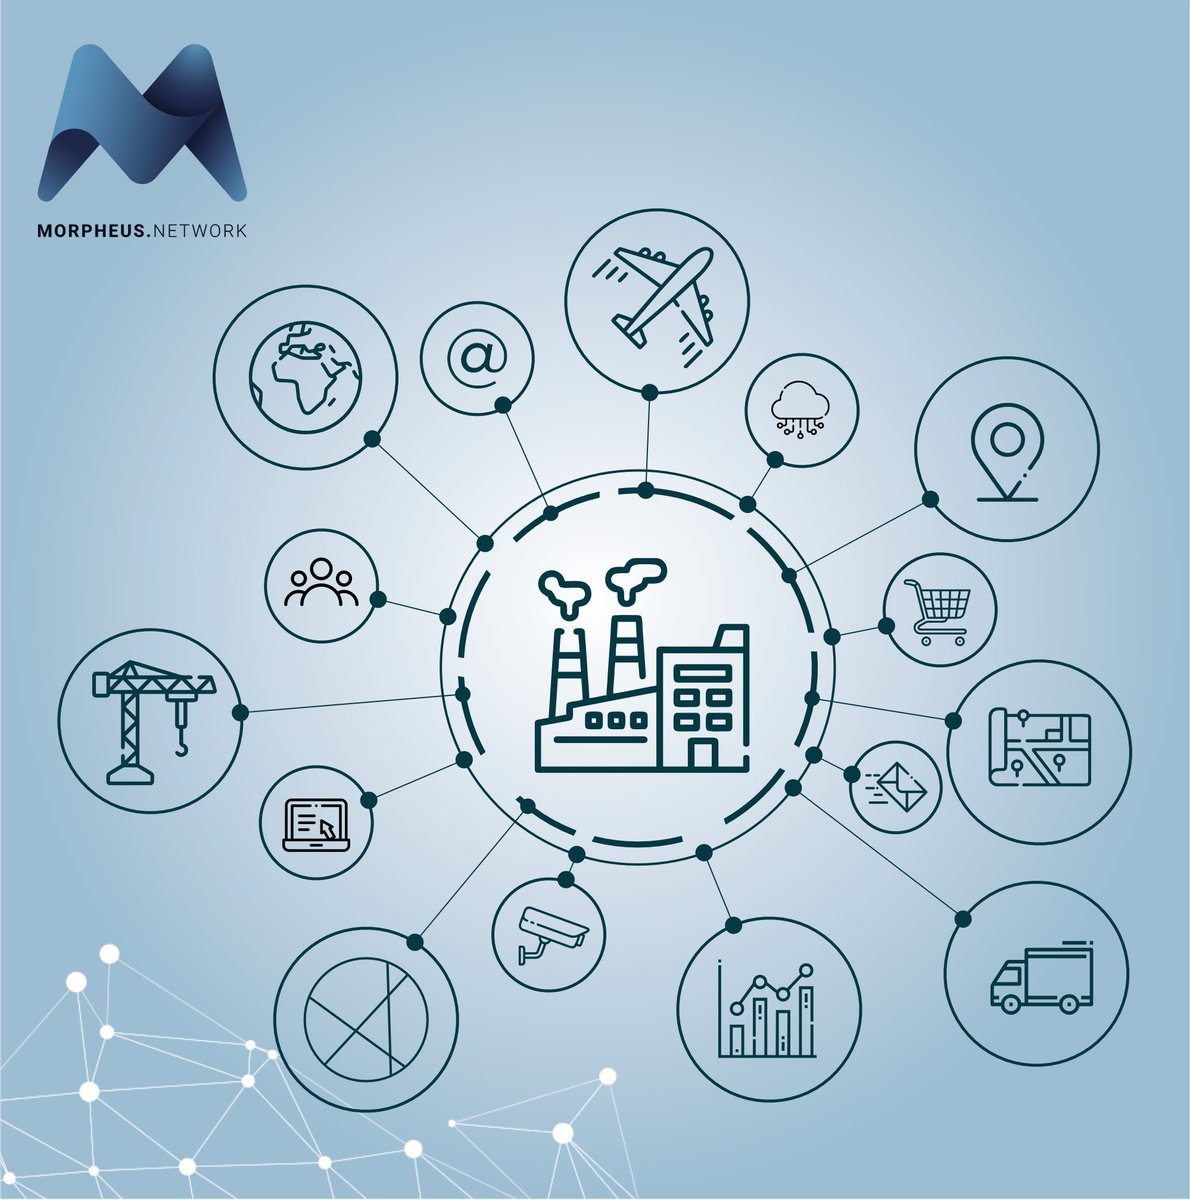 Efficiency and effectiveness are at the core of @MNWSupplyChain's mission. 

By using ML/AI, IoT, and Blockchain, their supply chain middleware platform helps companies protect sensitive data and optimize operations.

$MNW #SupplyChainEfficiency #DigitalSolutions